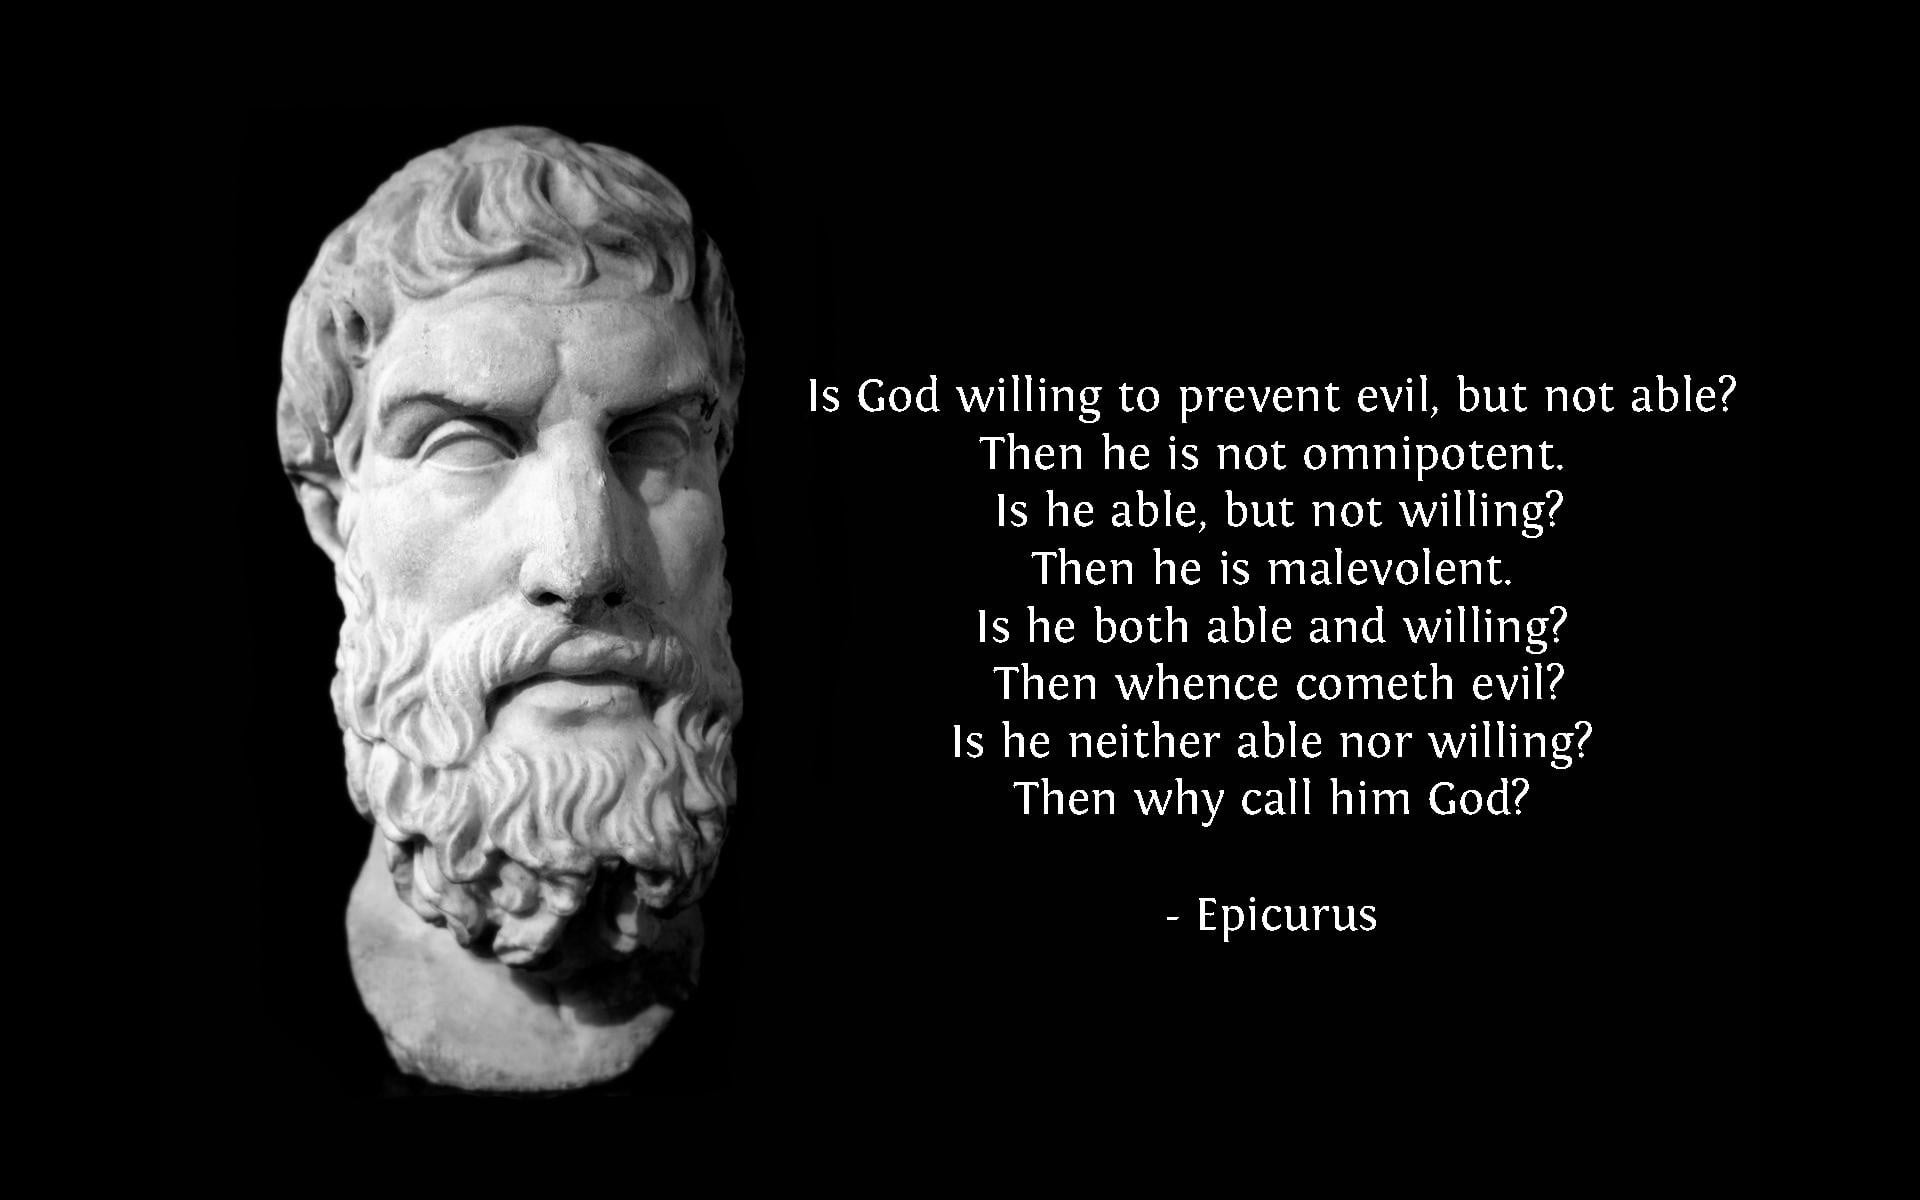 Epicurus bible verse, quote, sophistry